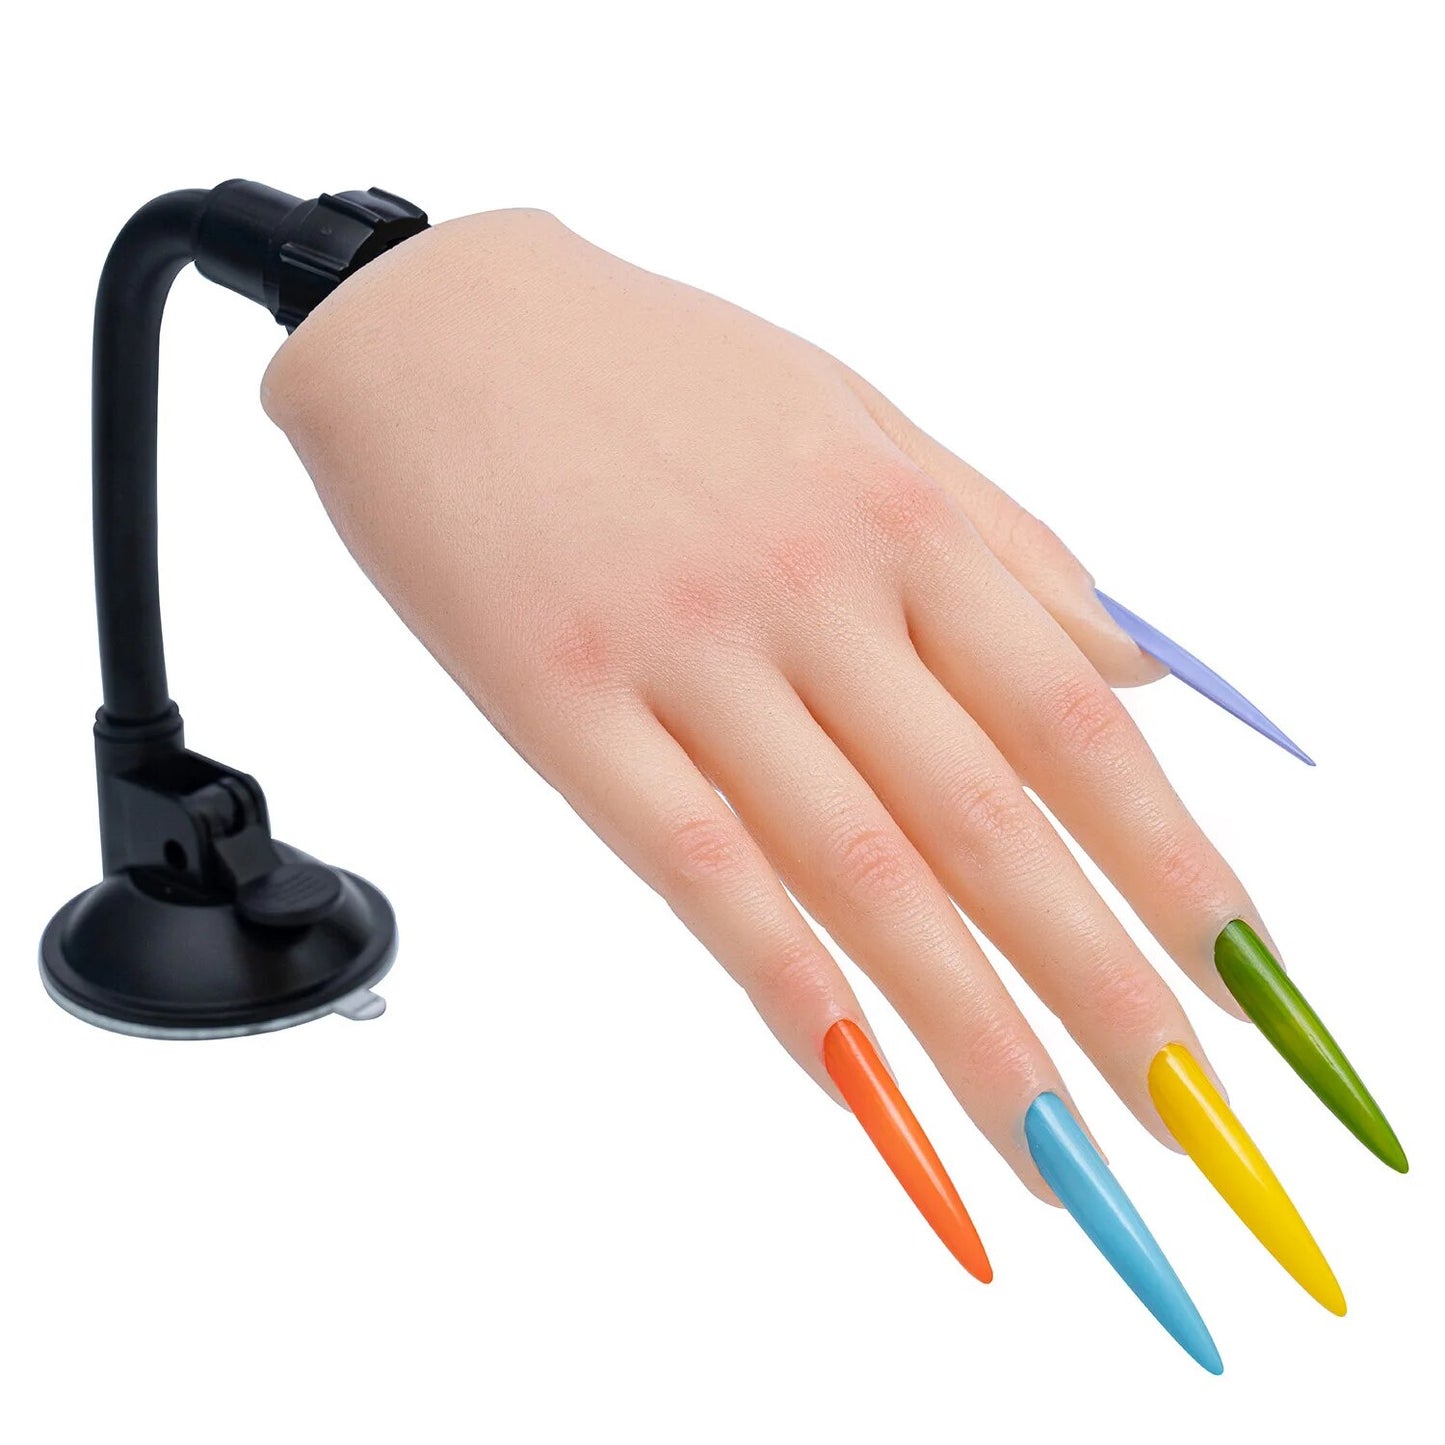 Training For Acrylic Nails Silicone Fake Hands To Nail Practice Hand Model Filming Props Veikmv